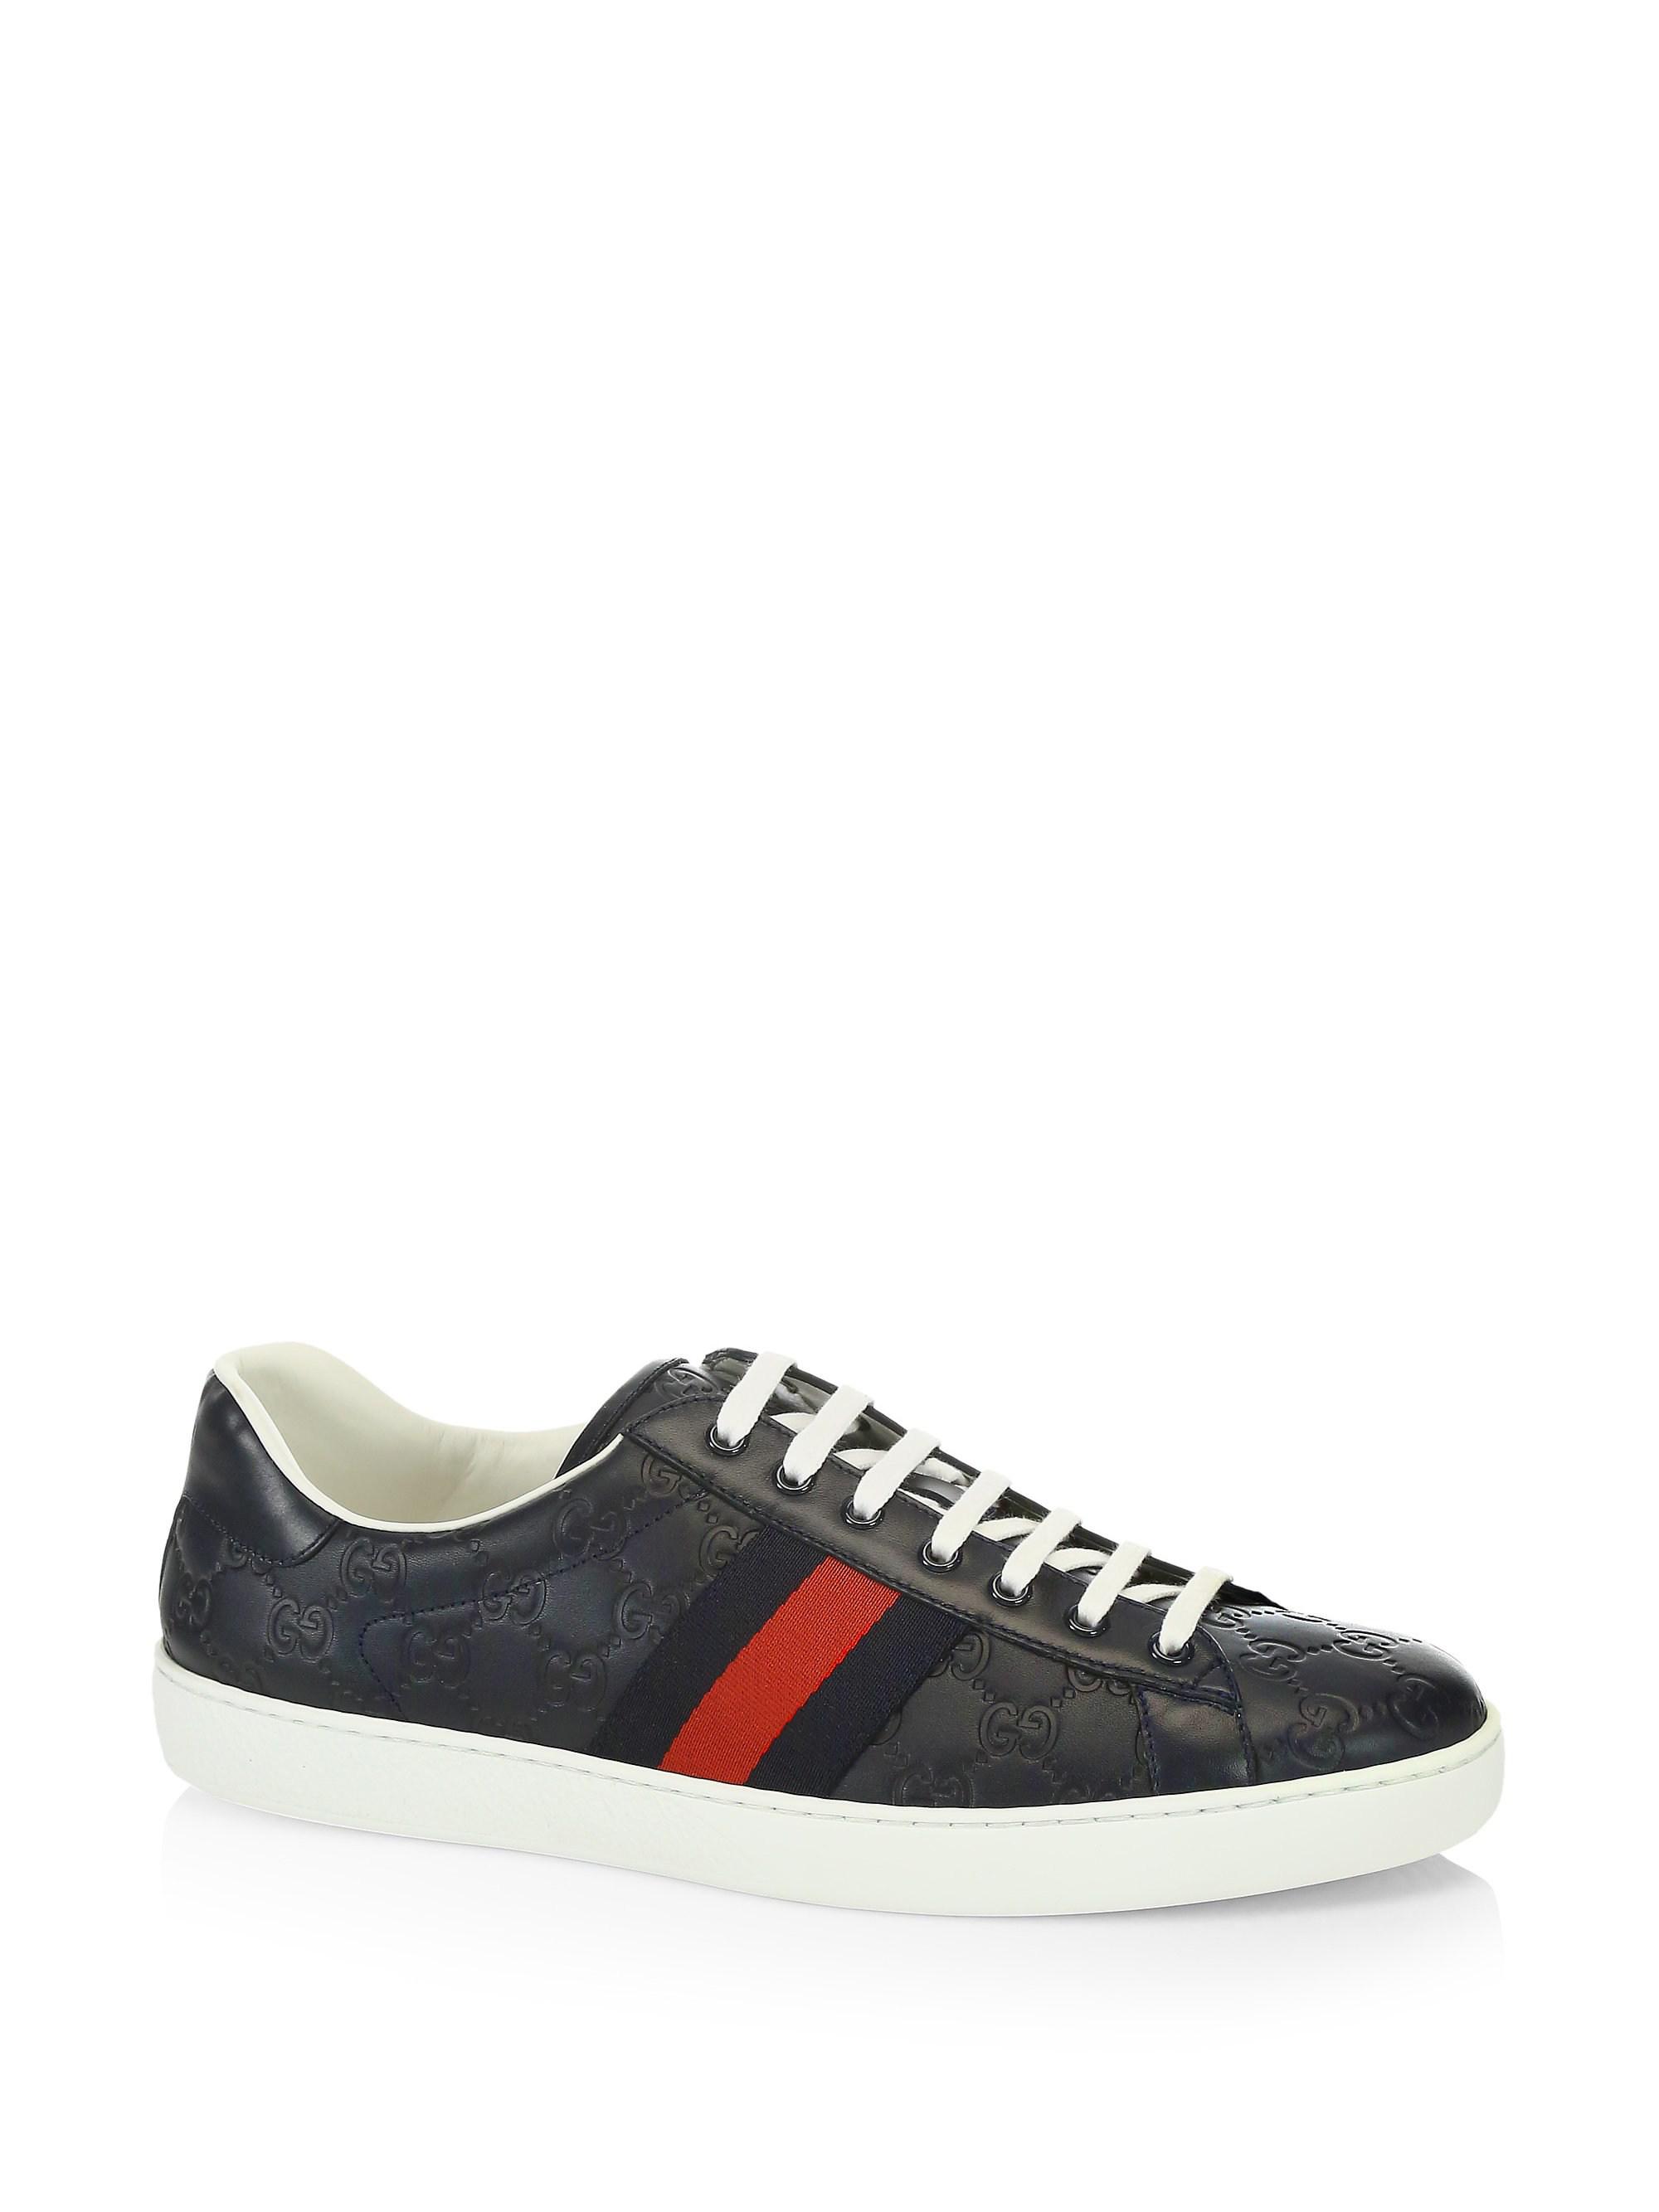 Lyst - Gucci Ace Signature Sneaker in Blue for Men